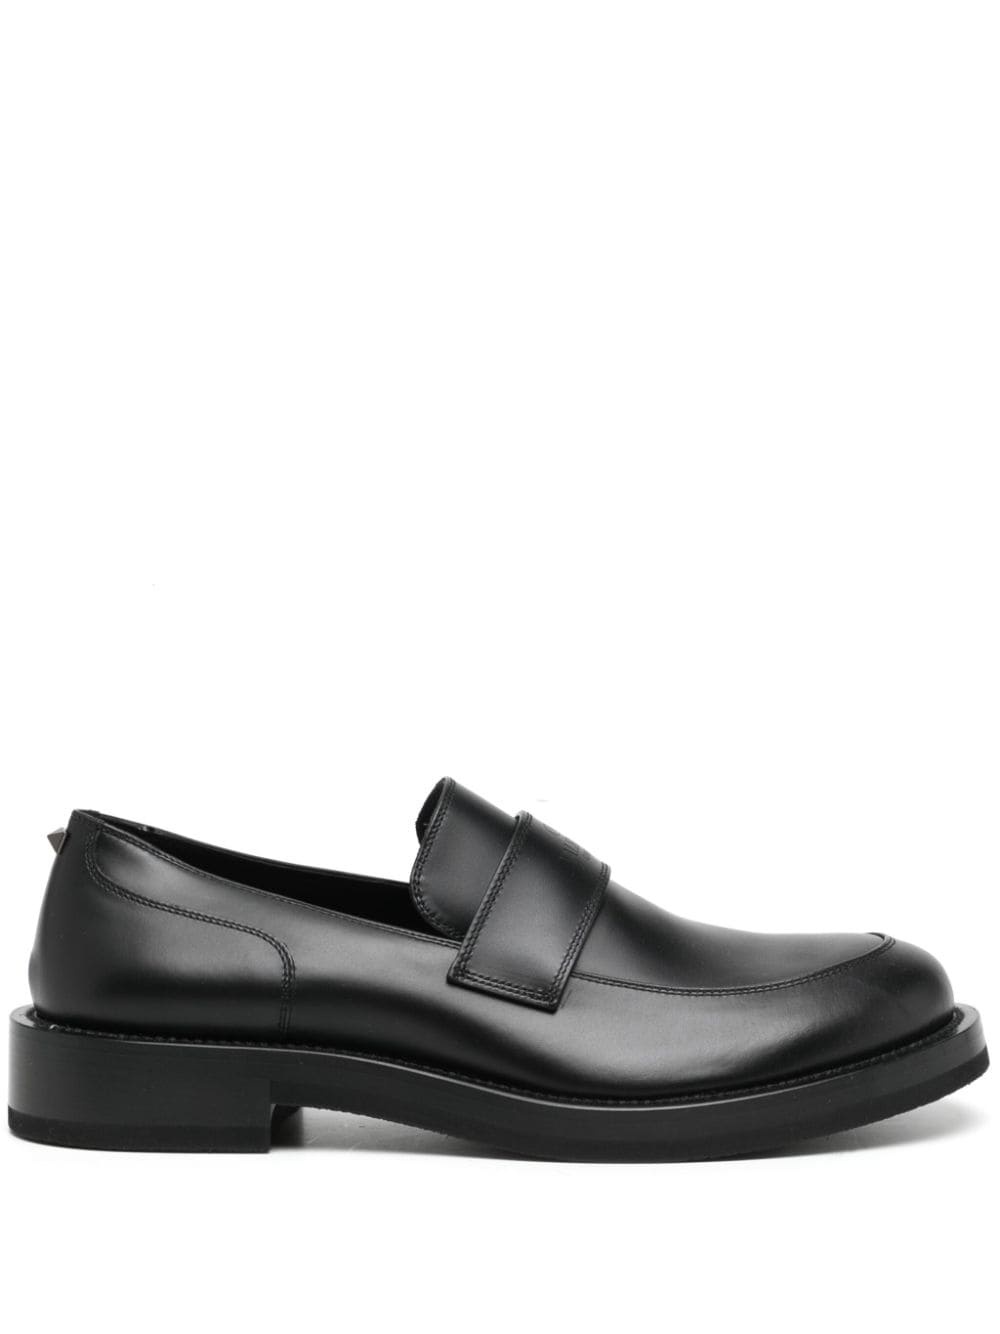 logo-debossed leather loafers - 1